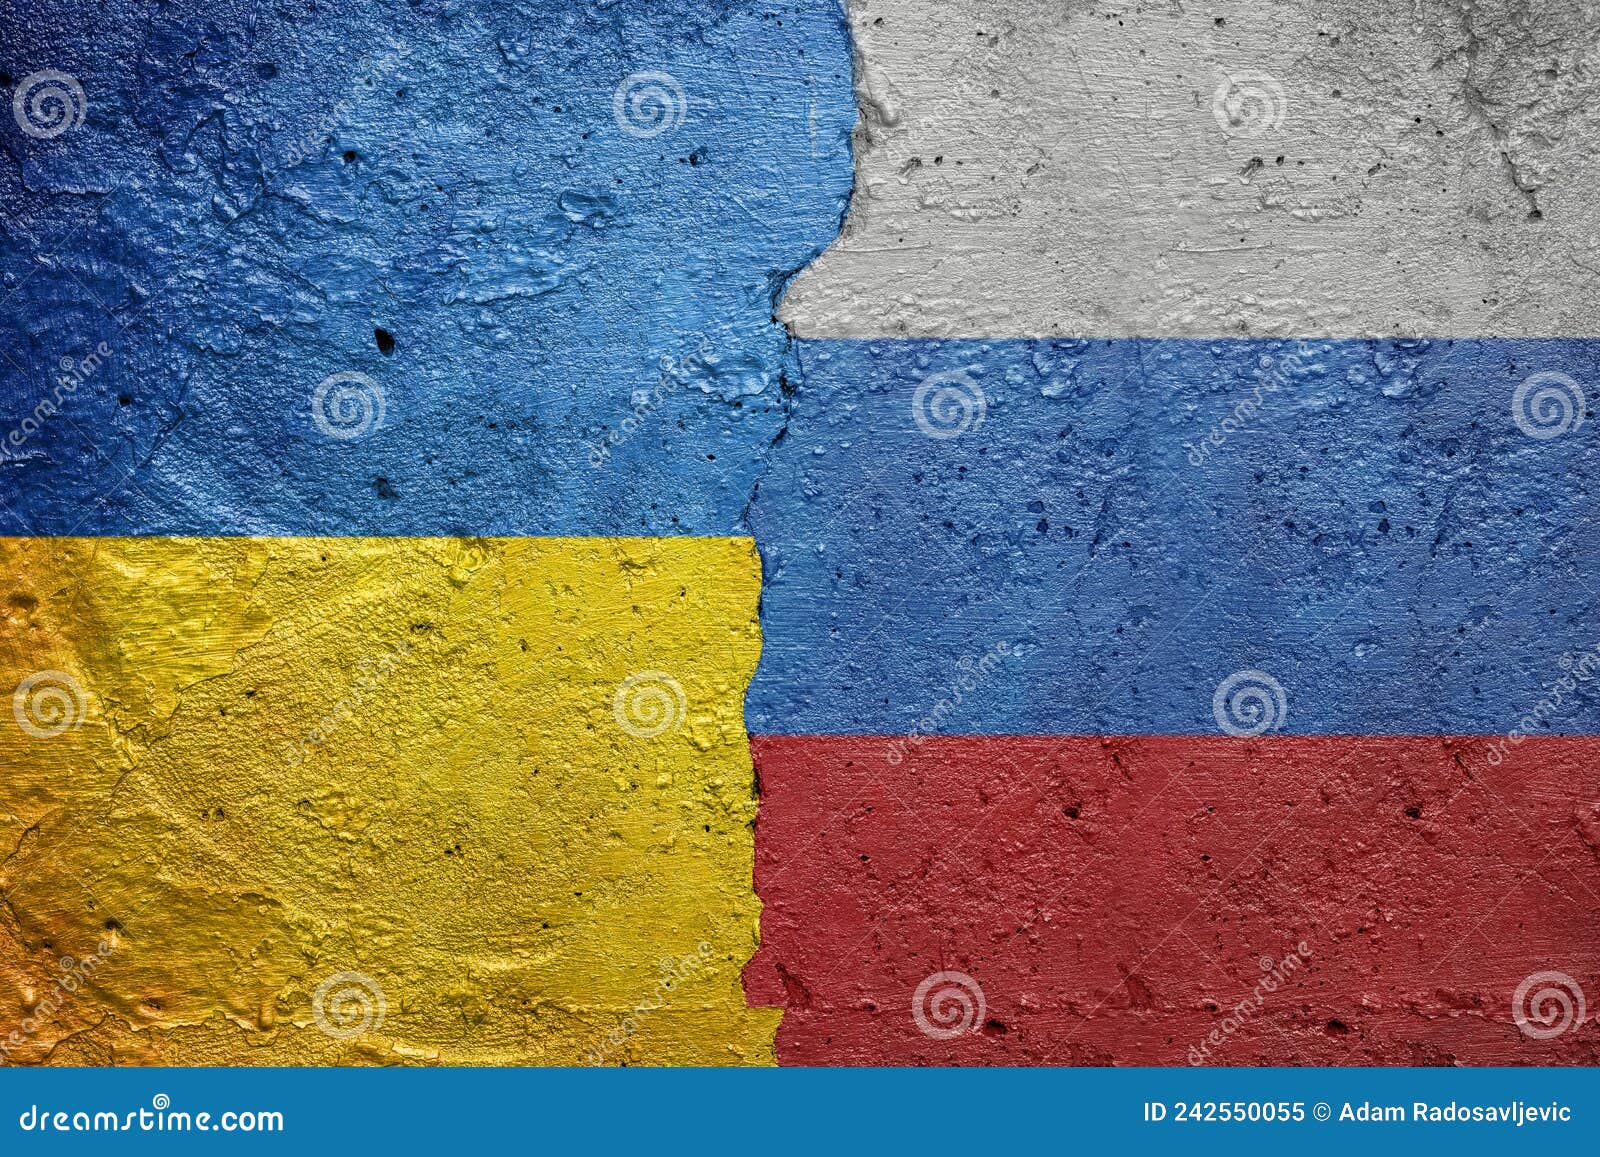 ukraine vs rusia - cracked beton wall painted with a ukrainian flag on the left and a russian flag on the right